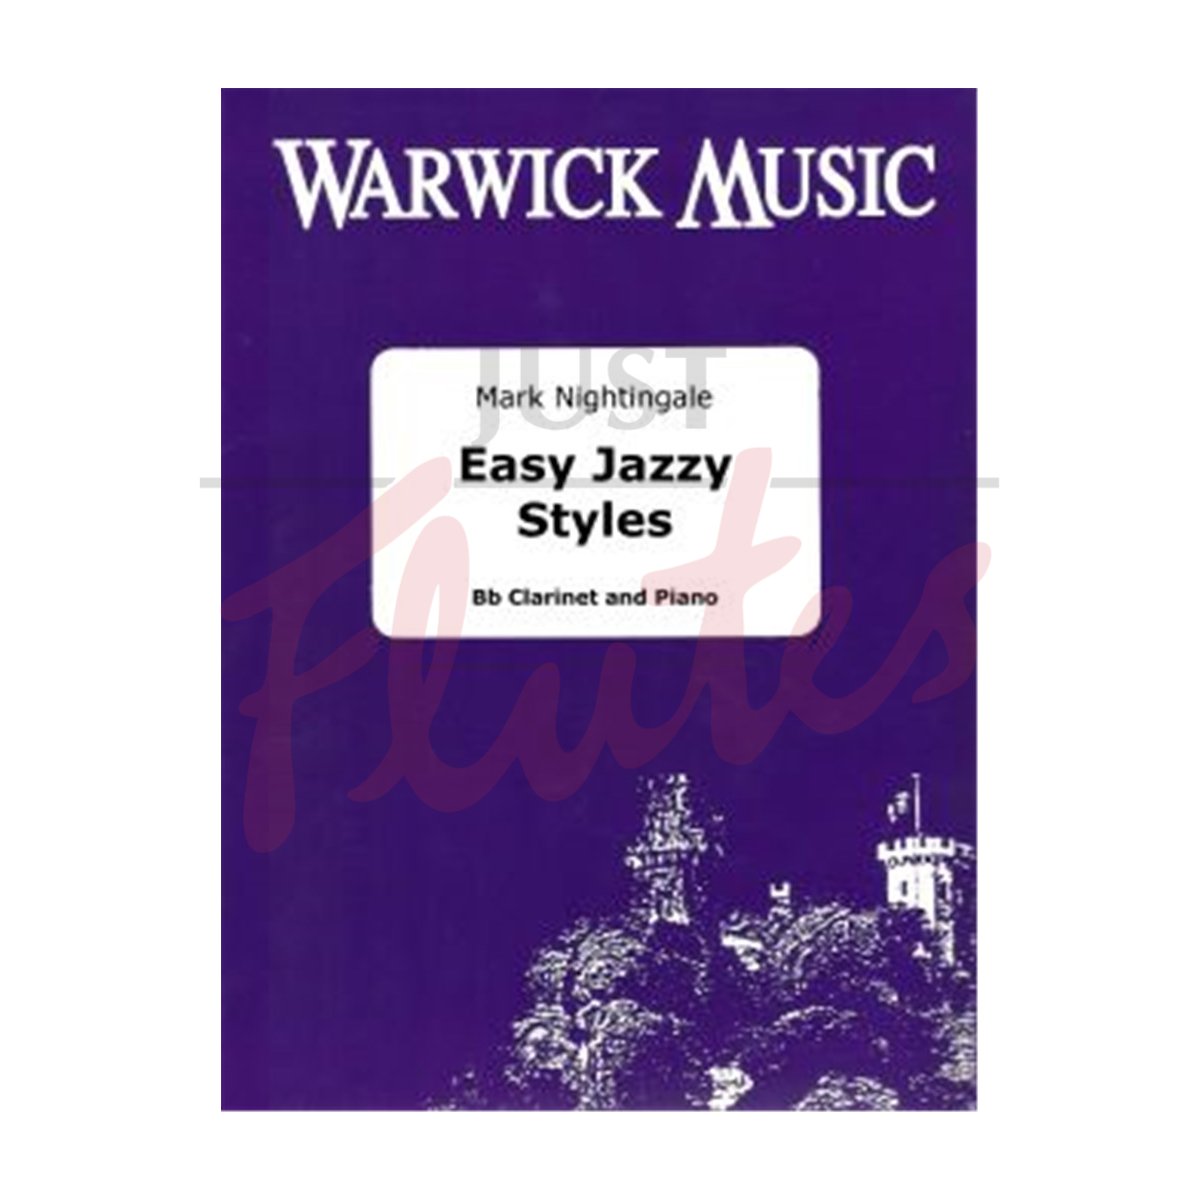 Easy Jazzy Styles for Clarinet and Piano